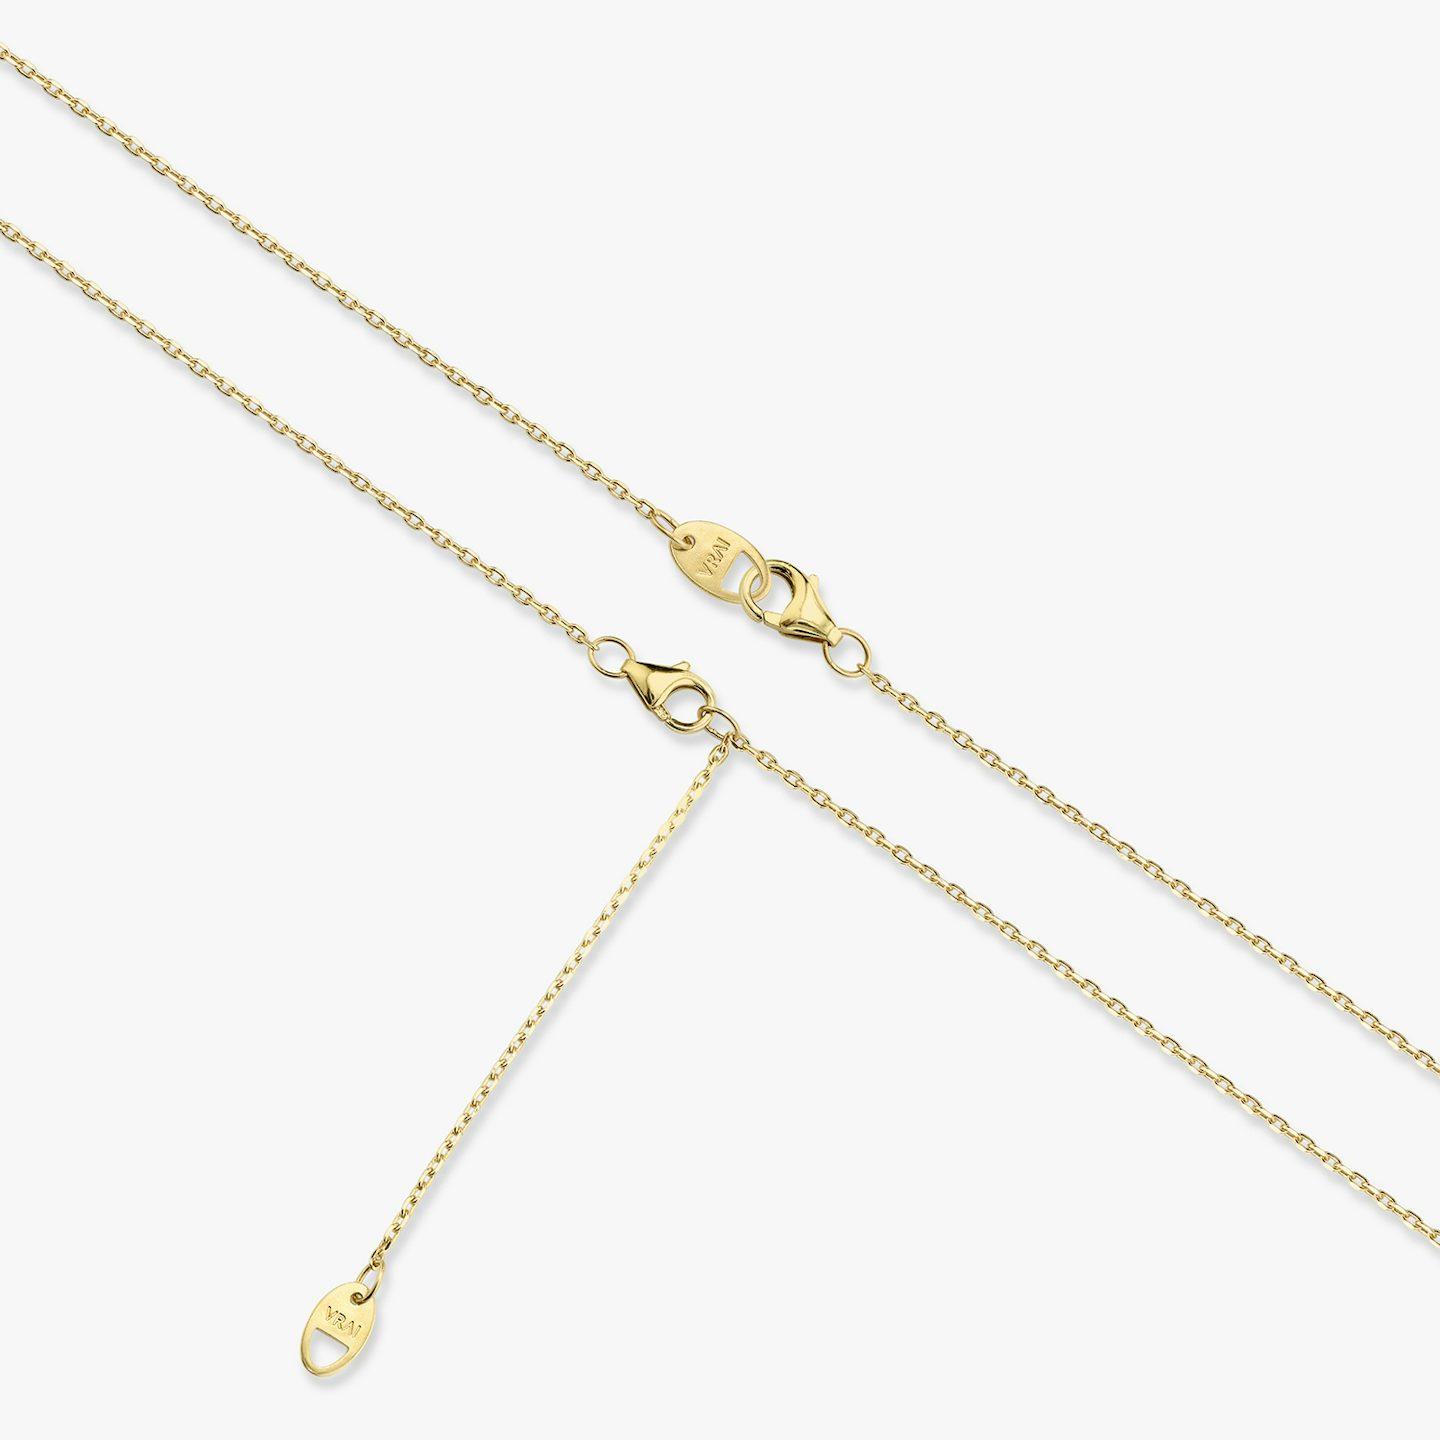 VRAI Solitaire Necklace | Emerald | 14k | 18k Yellow Gold | Carat weight: 1